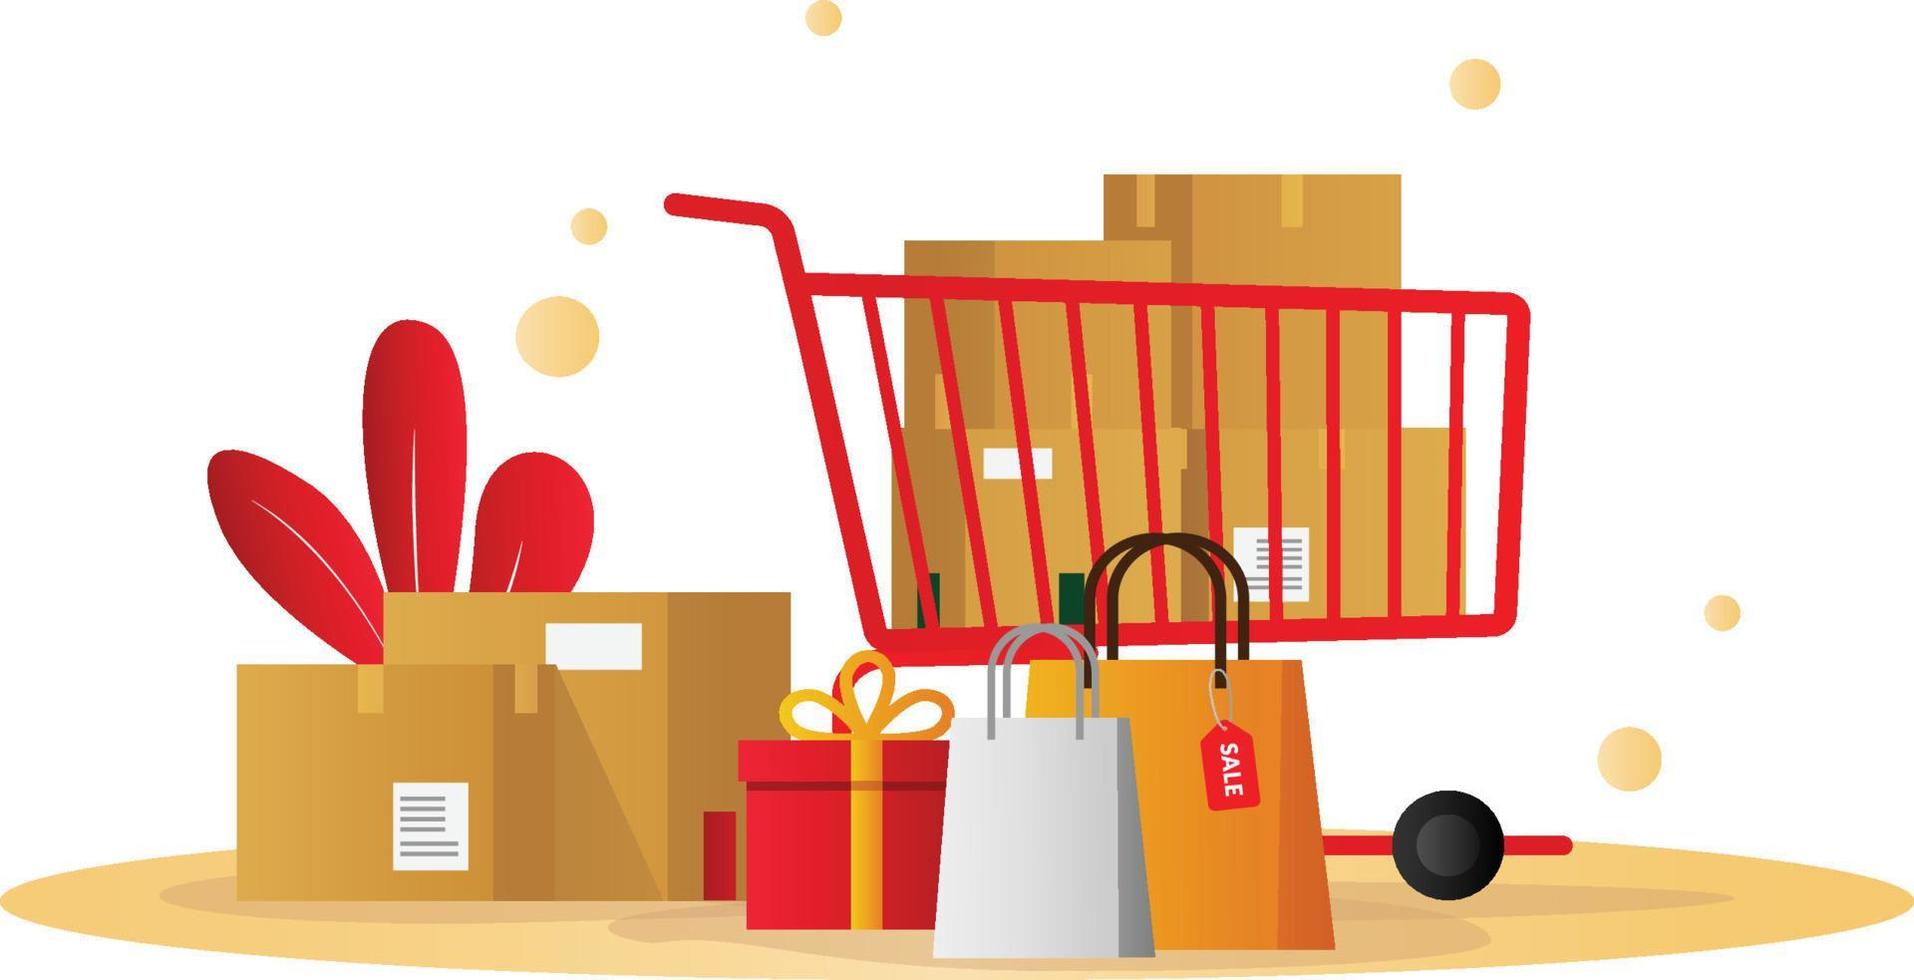 Supermarket Shopping Cart Design Full of Goods and Shopping Bags vector